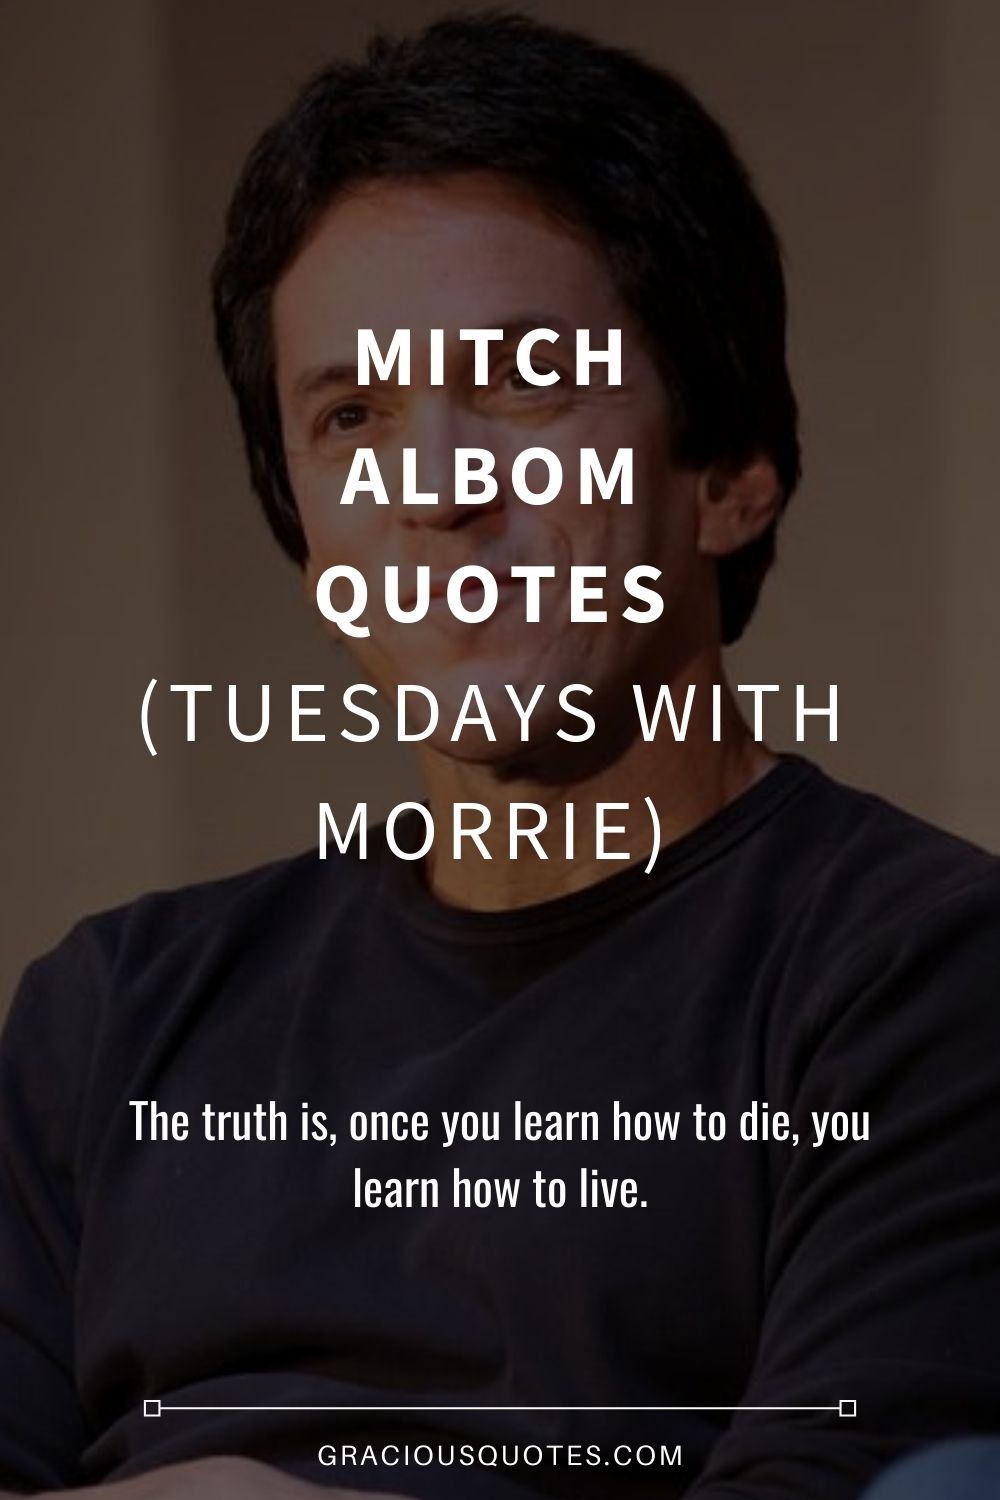 Mitch Albom Quotes (TUESDAYS WITH MORRIE) - Gracious Quotes